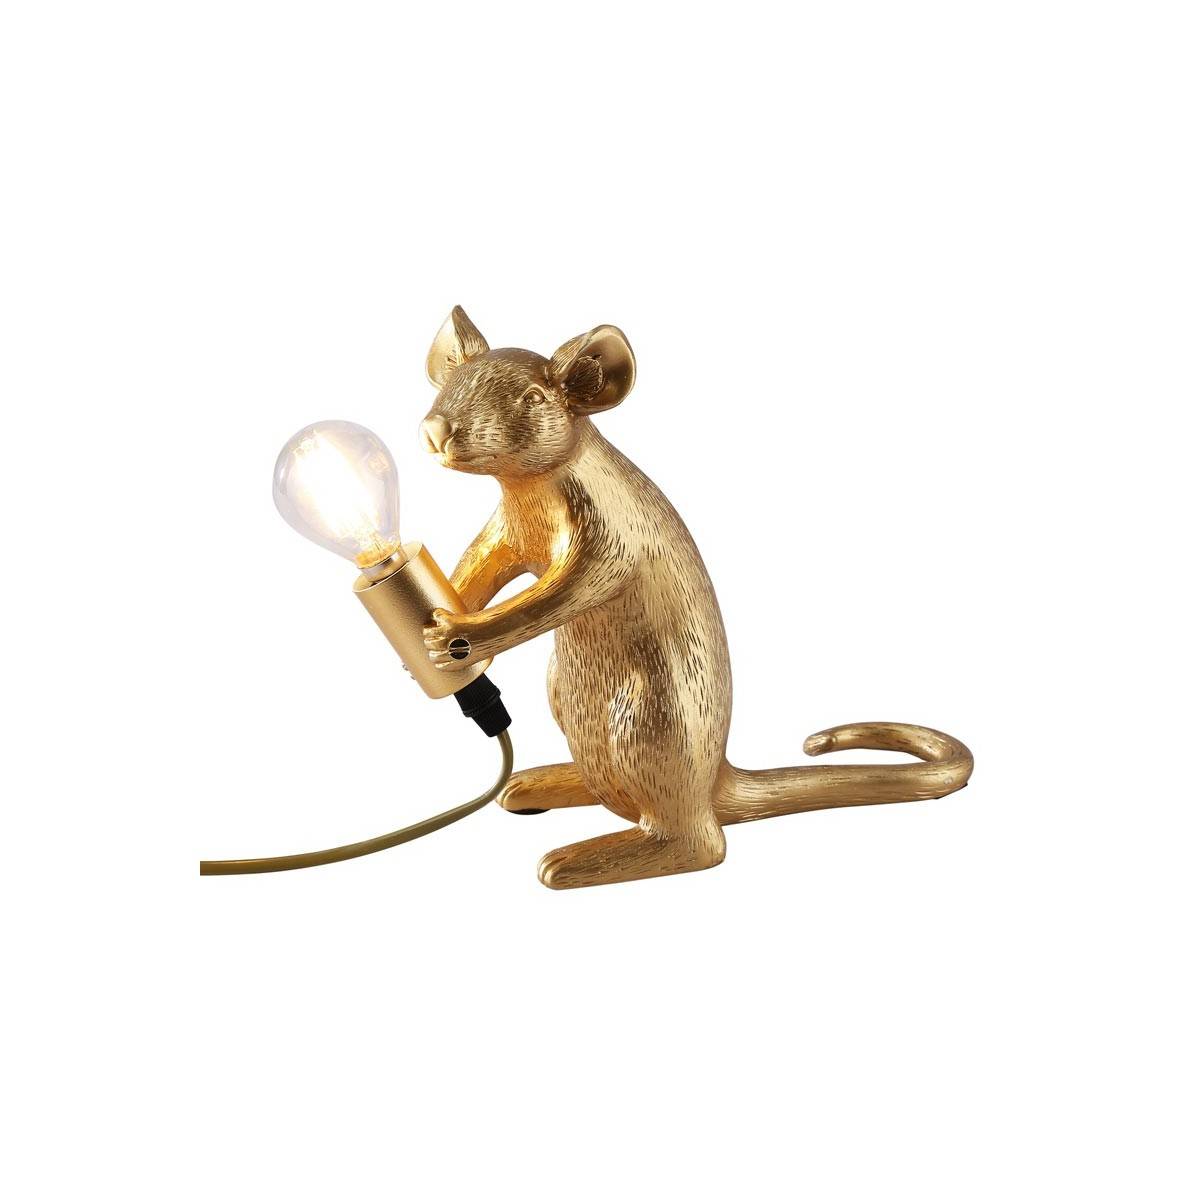 Resin mouse table lamp "MOUSE".